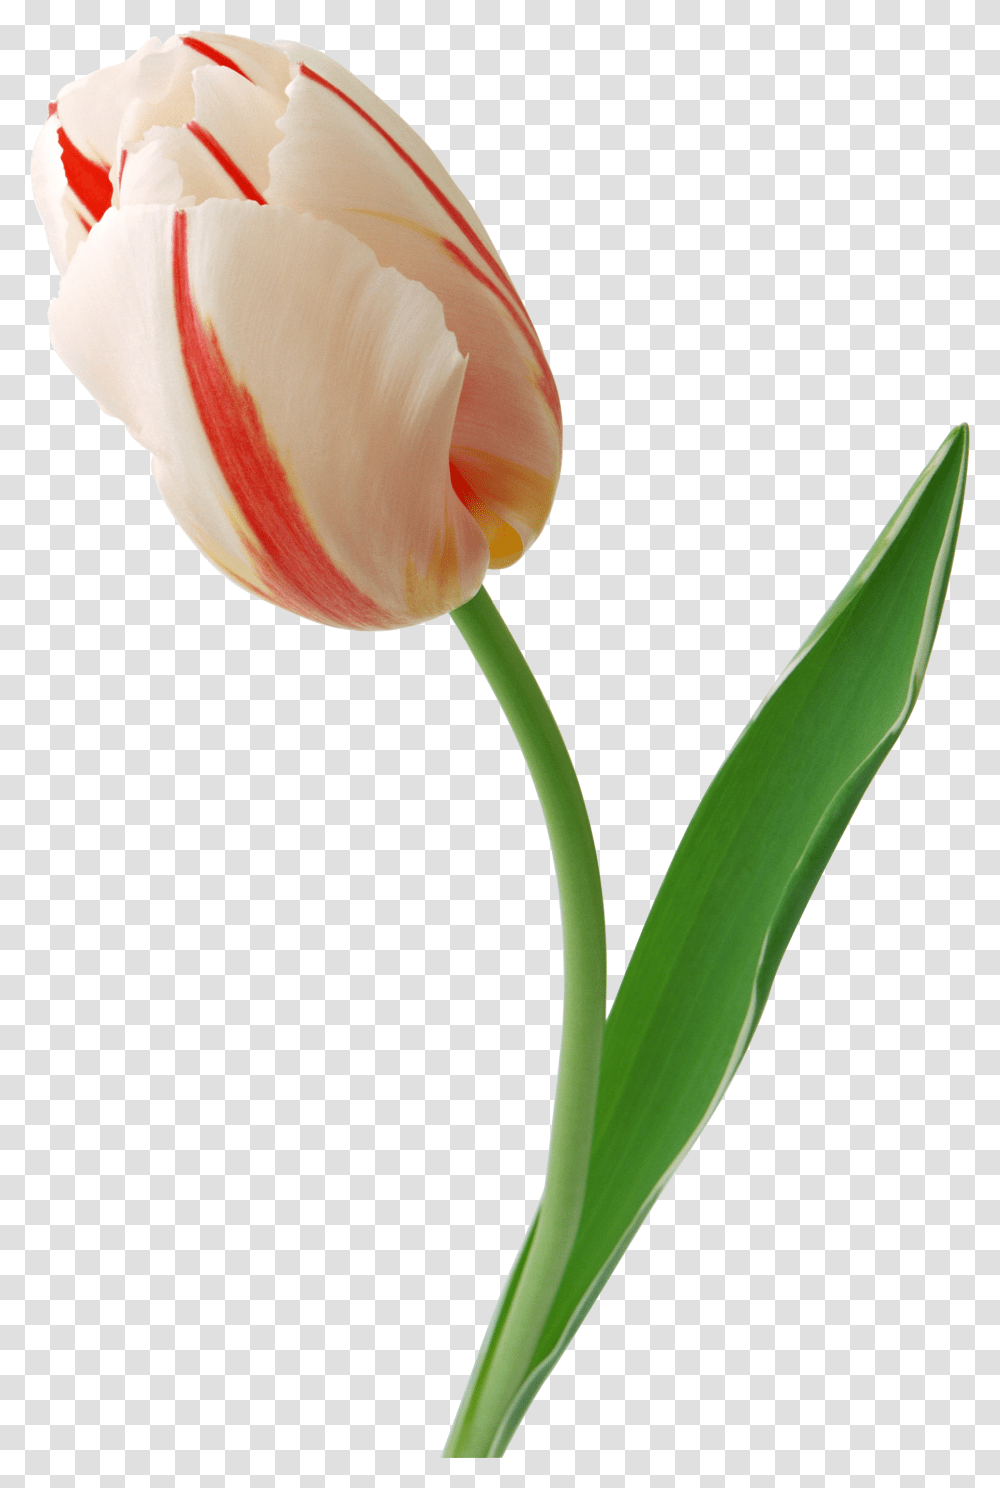 Now You Can Download Tulip In, Plant, Flower, Blossom, Petal Transparent Png